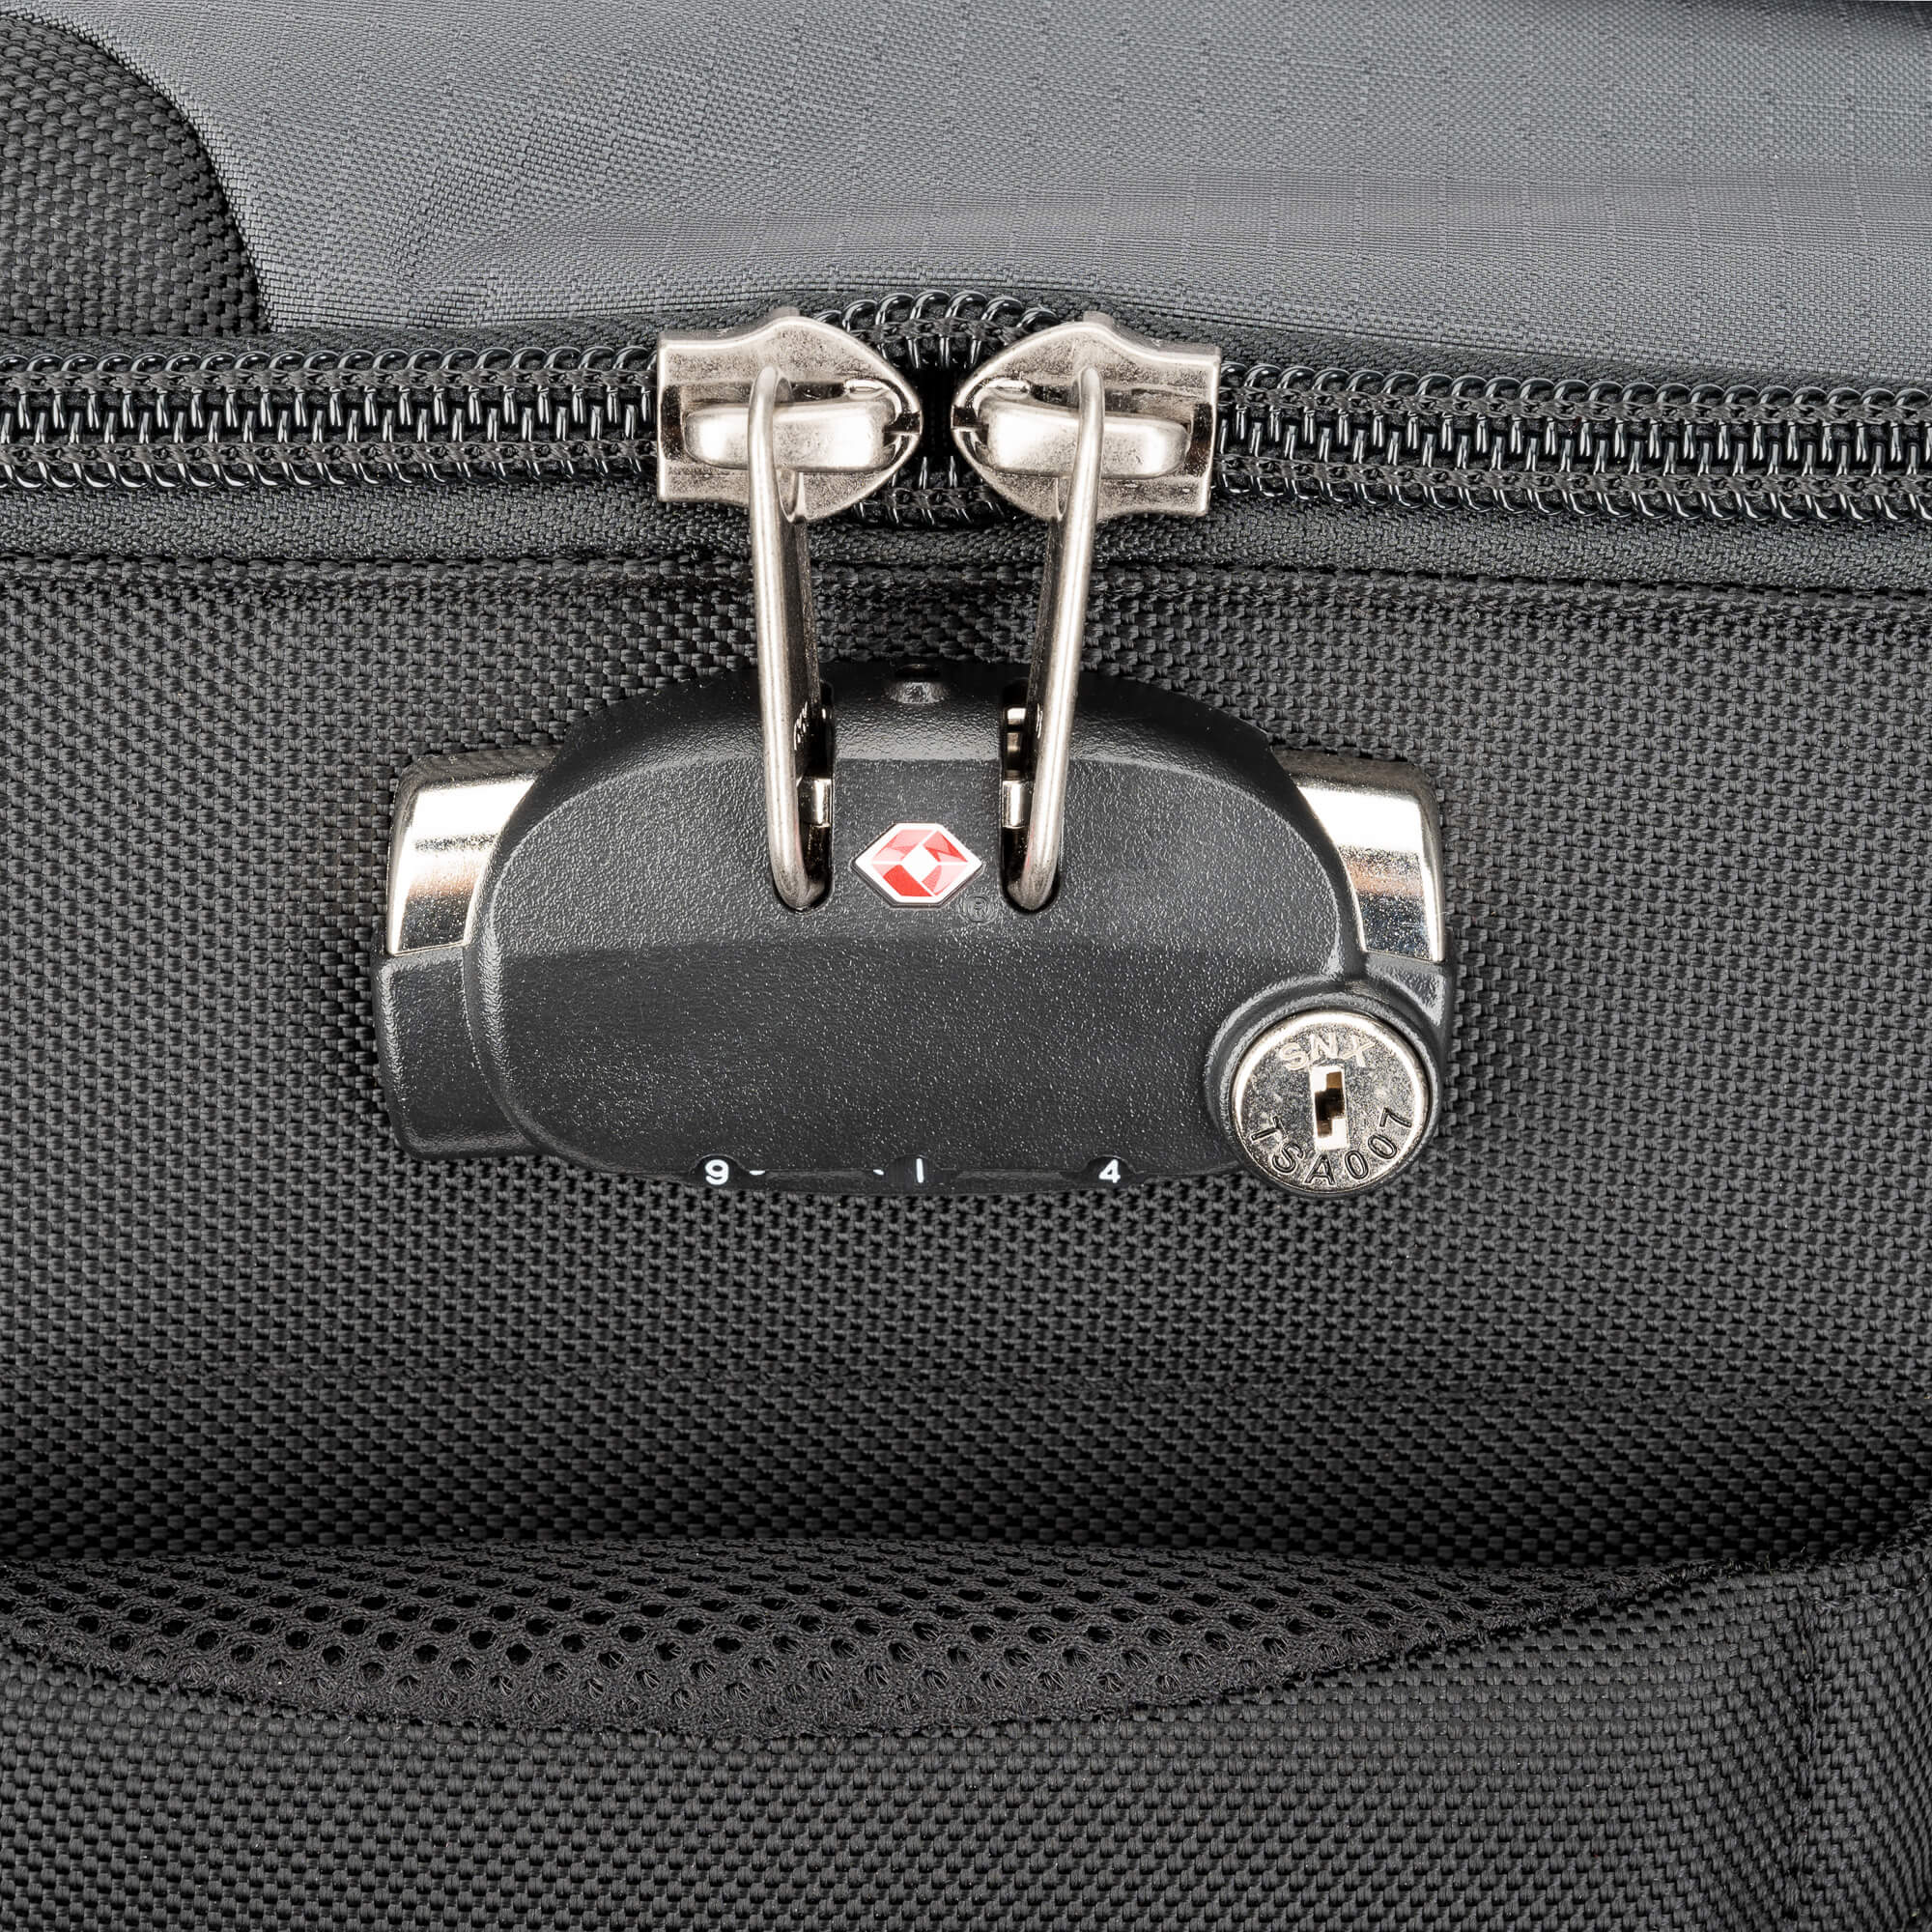 Security features include main compartment lock